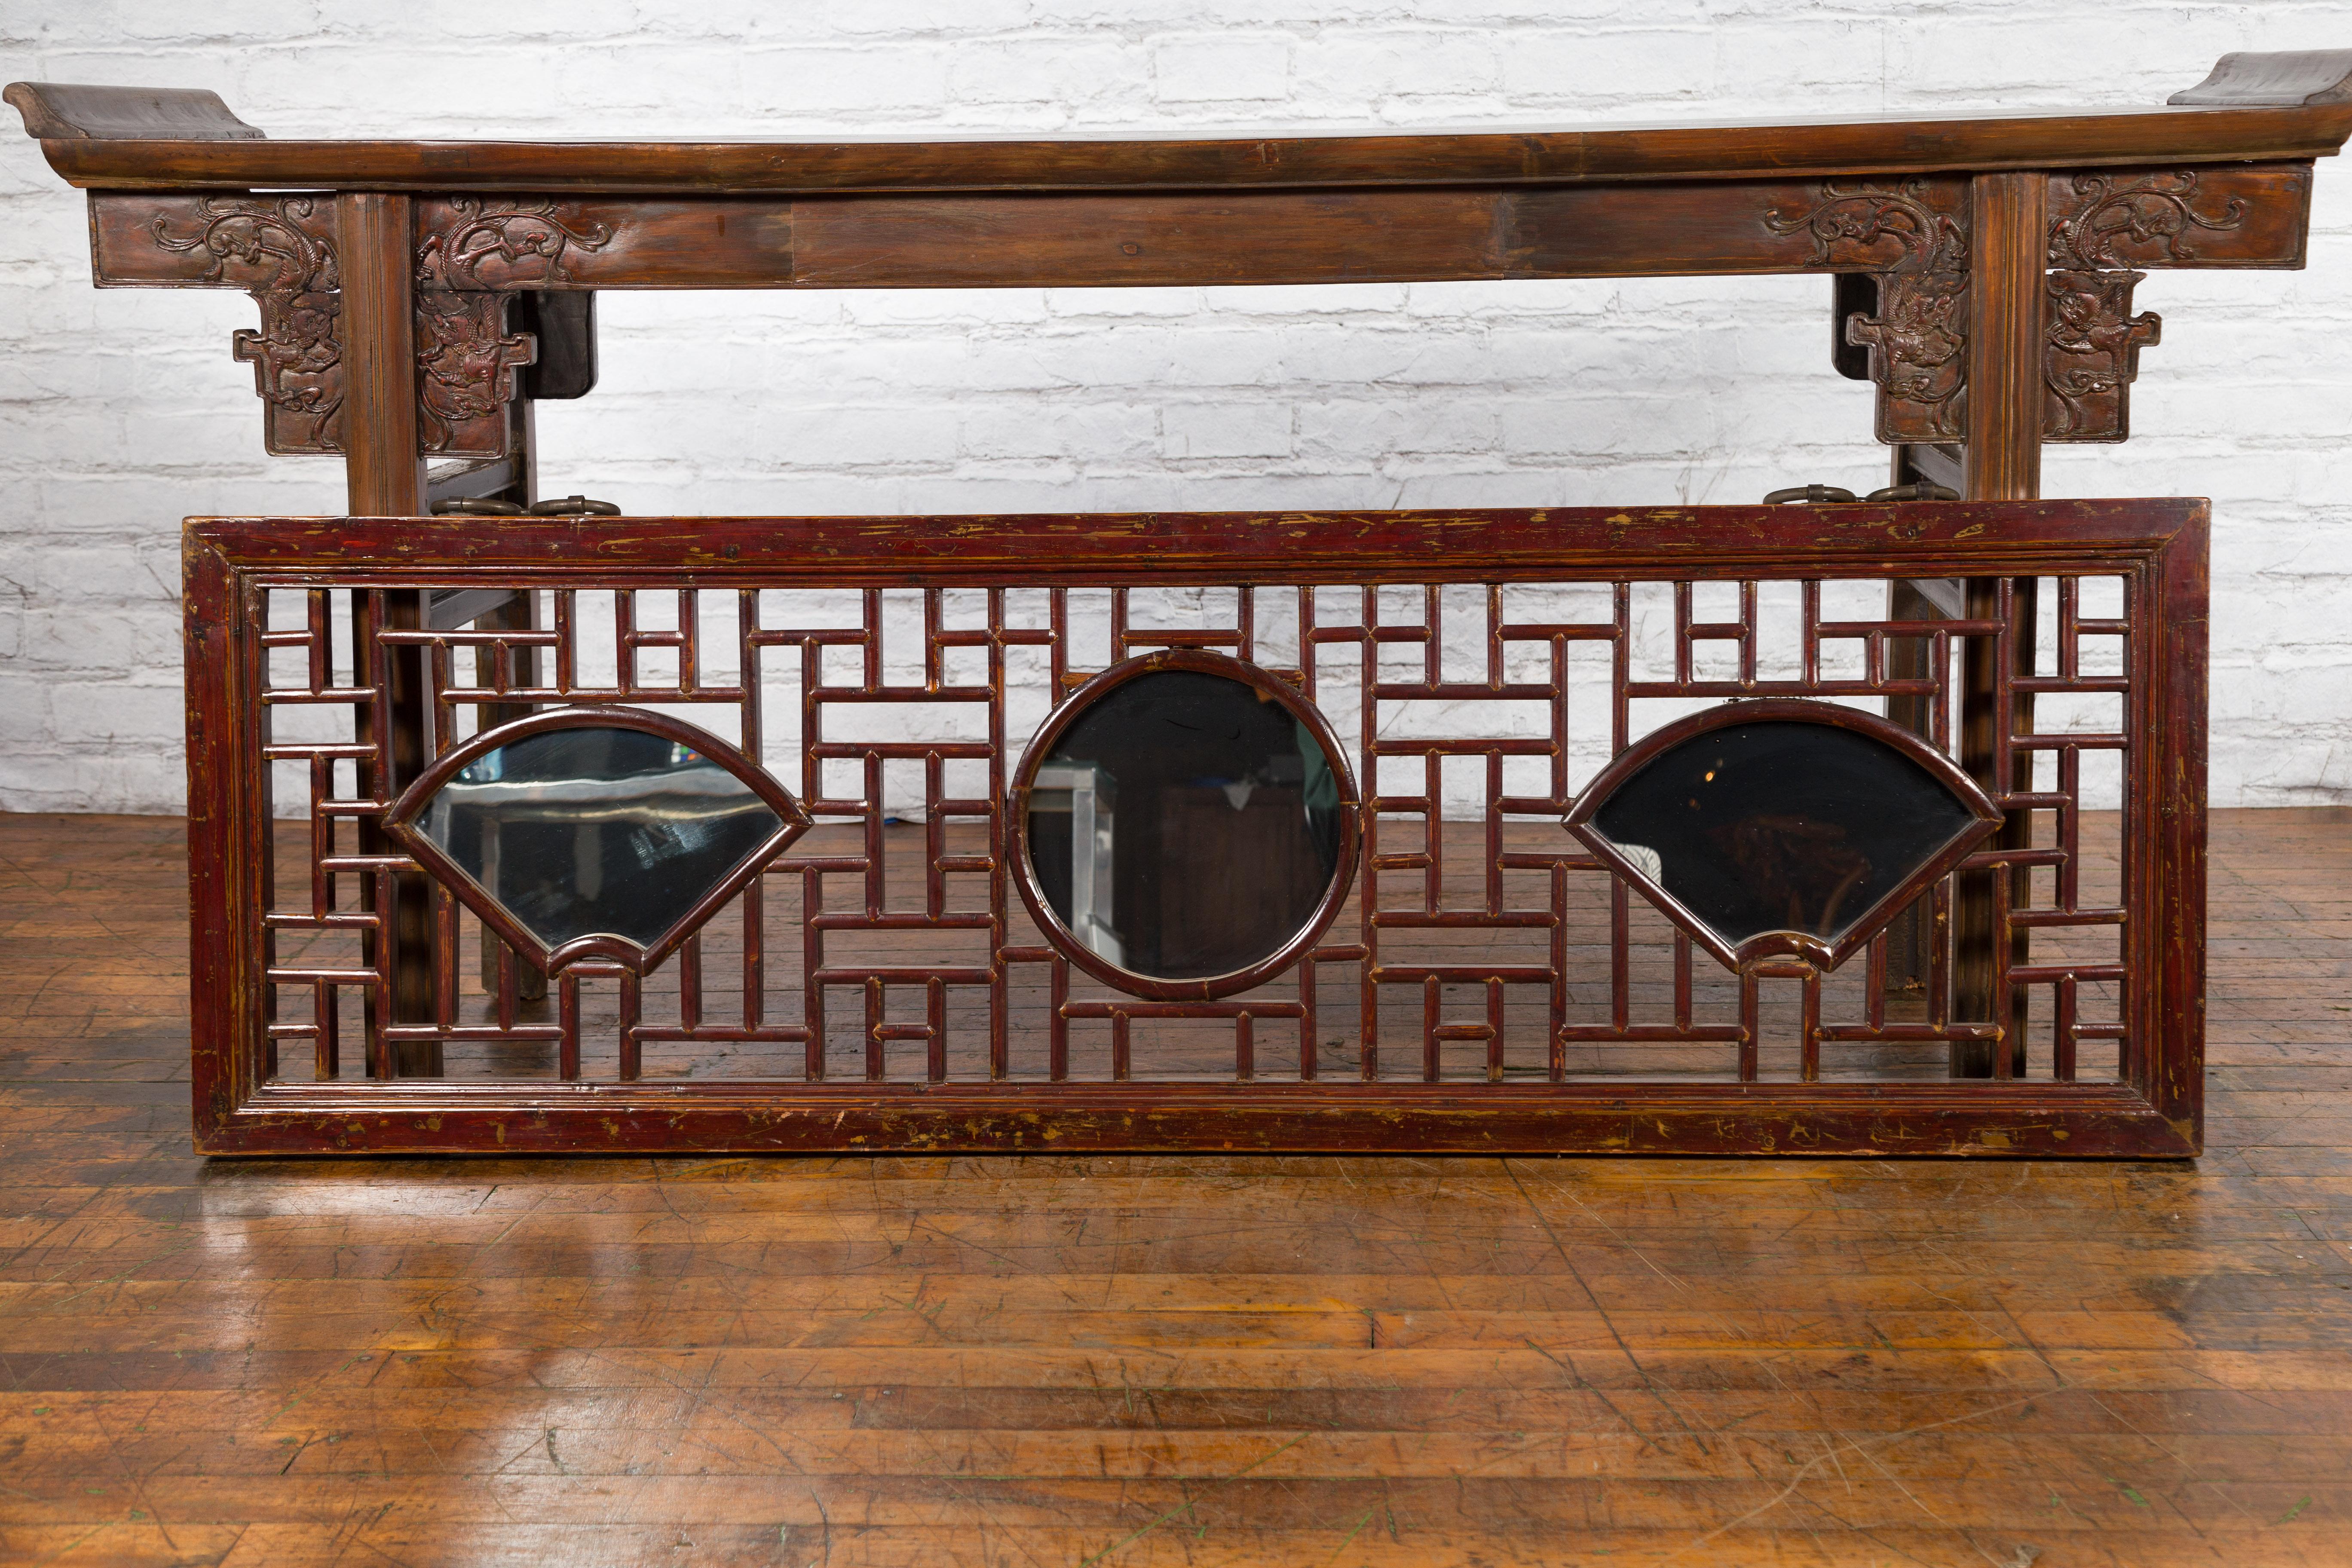 A Chinese Qing Dynasty period three-panel horizontal elmwood mirror from the 19th century, with fretwork and fan shaped motifs. Created in China during the Qing Dynasty, this 19th century elmwood panel is adorned with fretwork motifs surrounding a